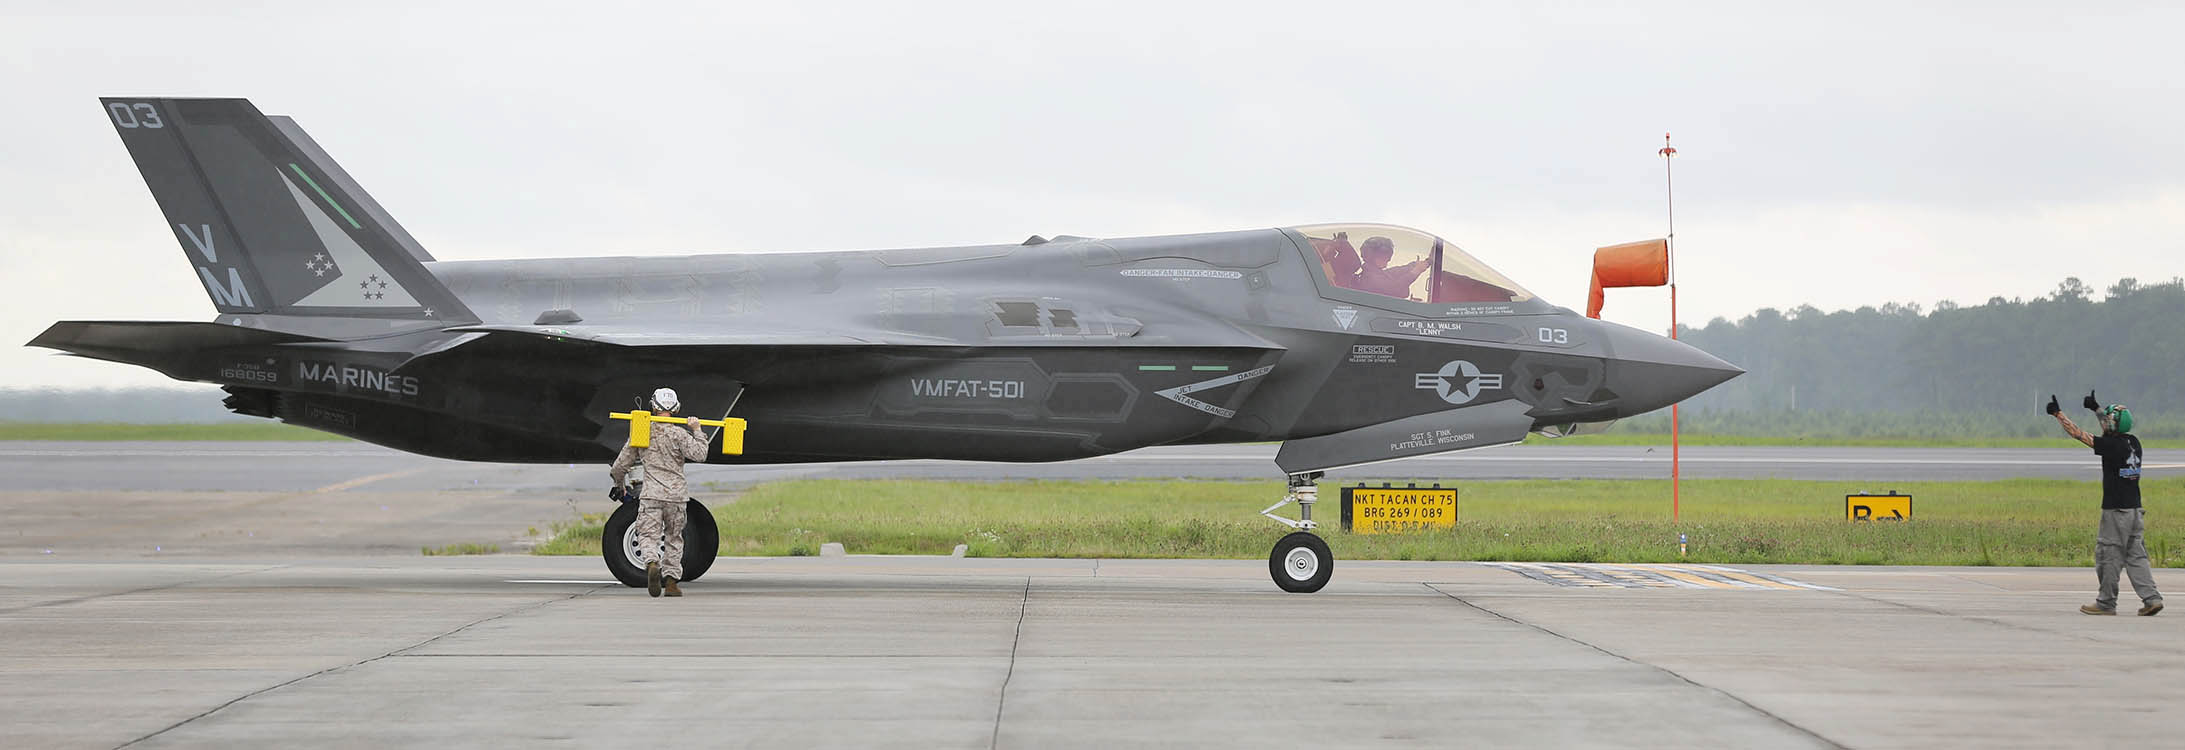 An F-35B Lightning II taxis at Marine Corps Air Station Cherry Point. It’s one of the types of aircraft ECU engineering students are working with as part of the new Engineering Developmental Assistance Program through Fleet Readiness Center East. (Contributed photo by U.S. Marine Corps)